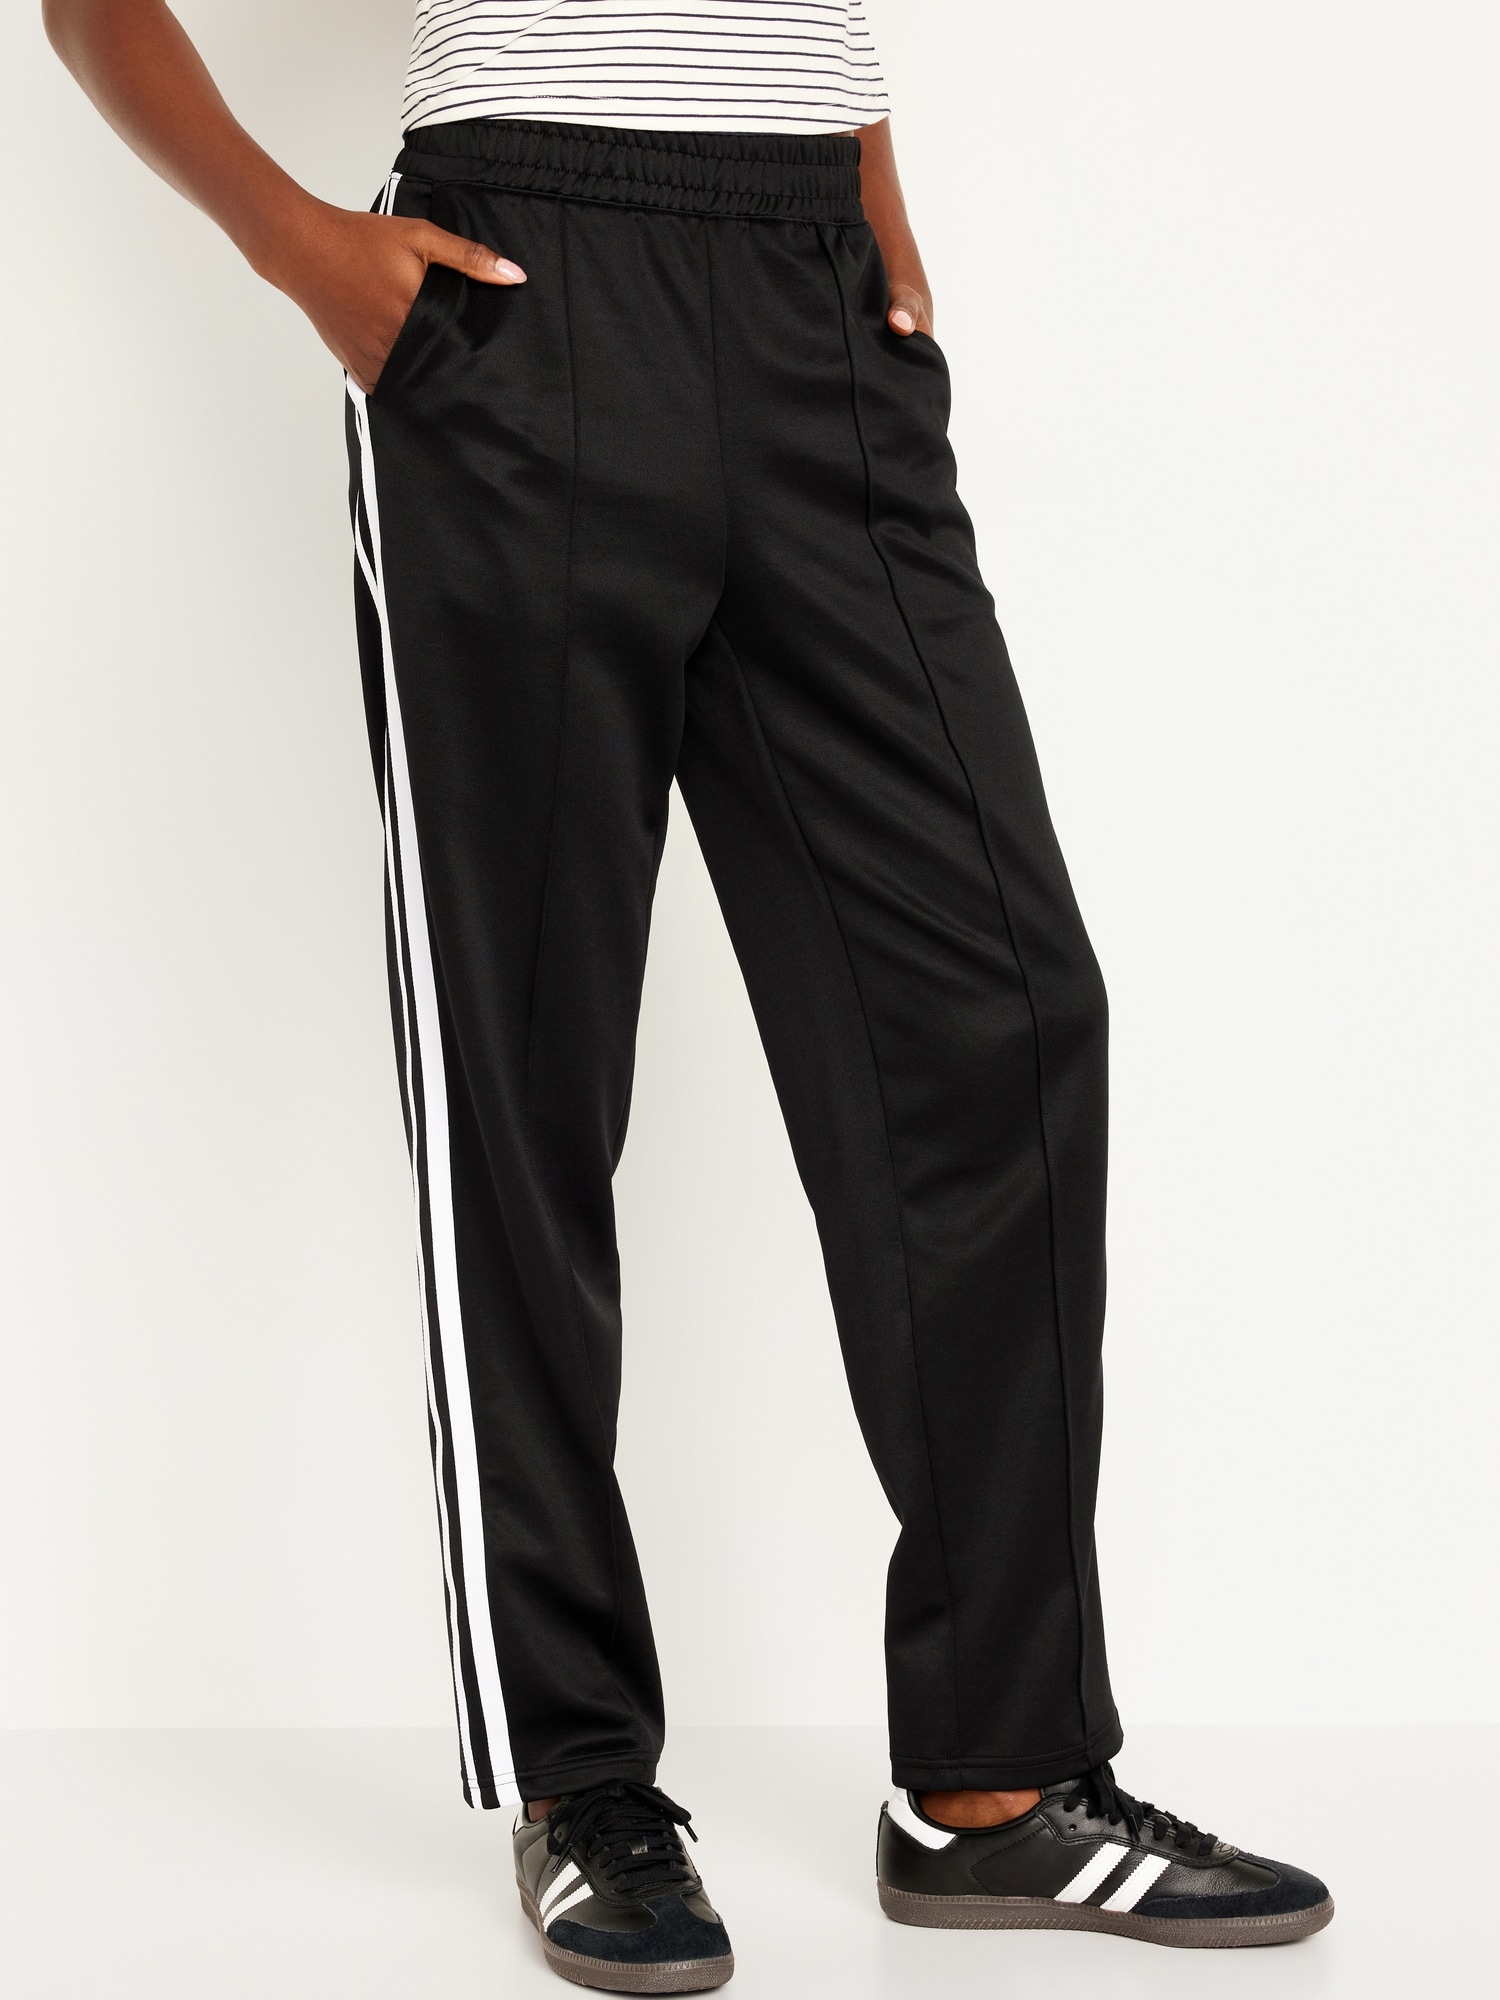 High-Waisted Performance Track Pants for Women